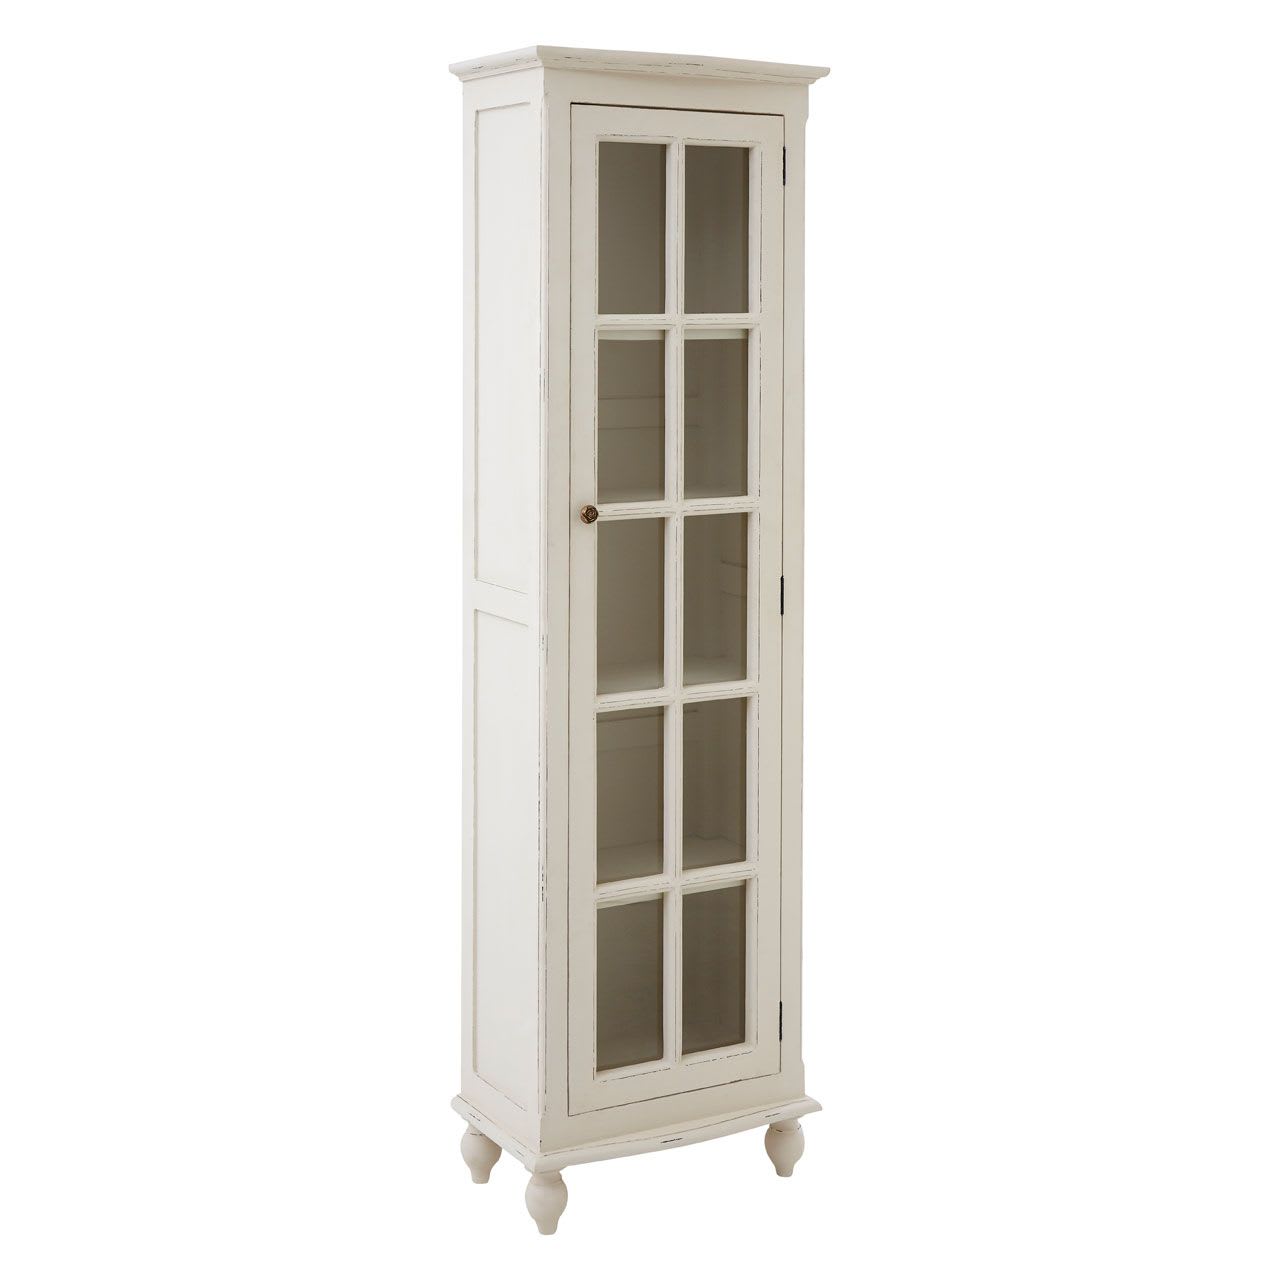 Antique Style Panelled Display Unit